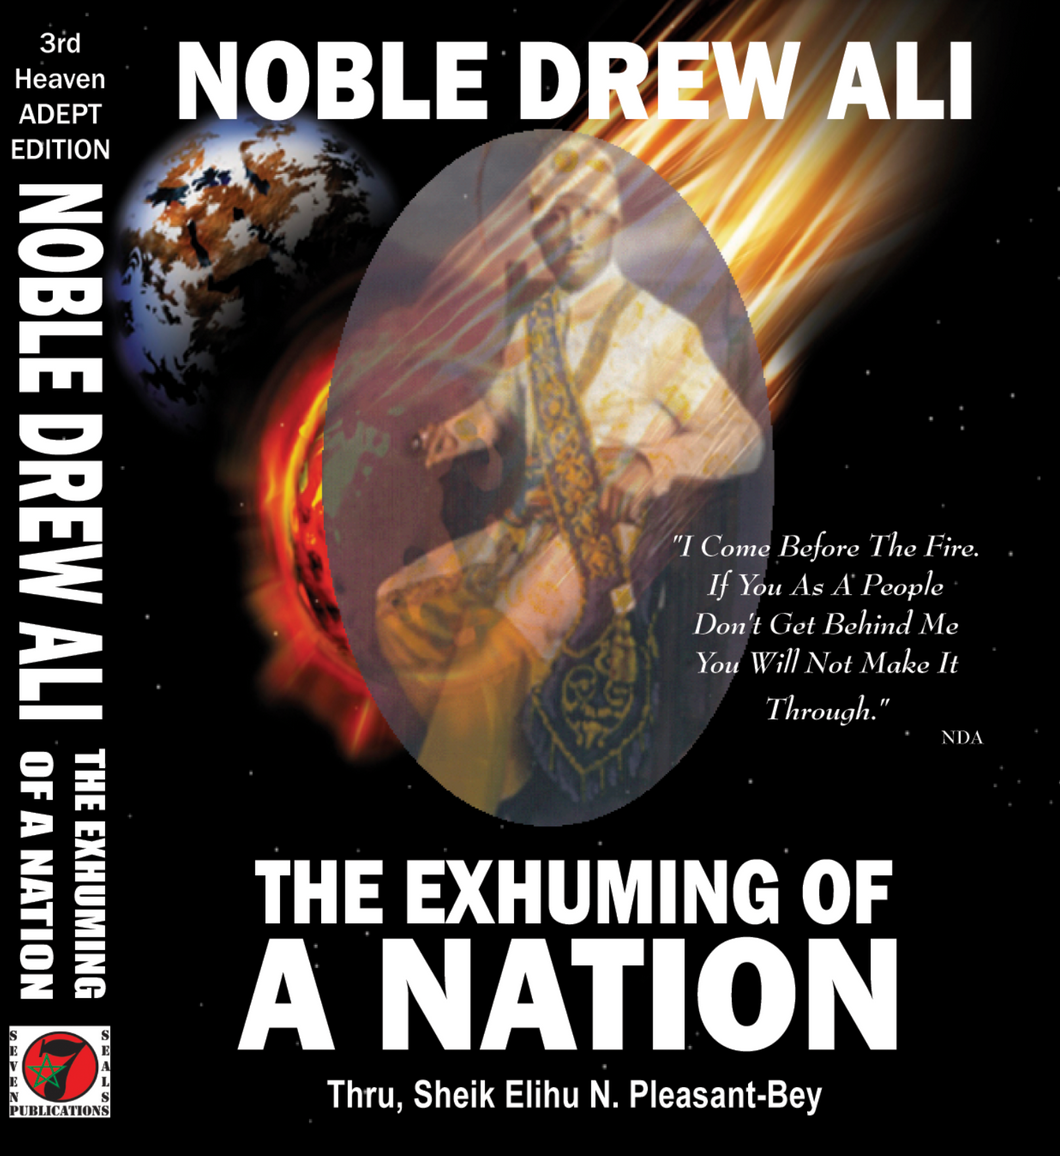 Noble Drew Ali: The Exhuming of A Nation (PDF)